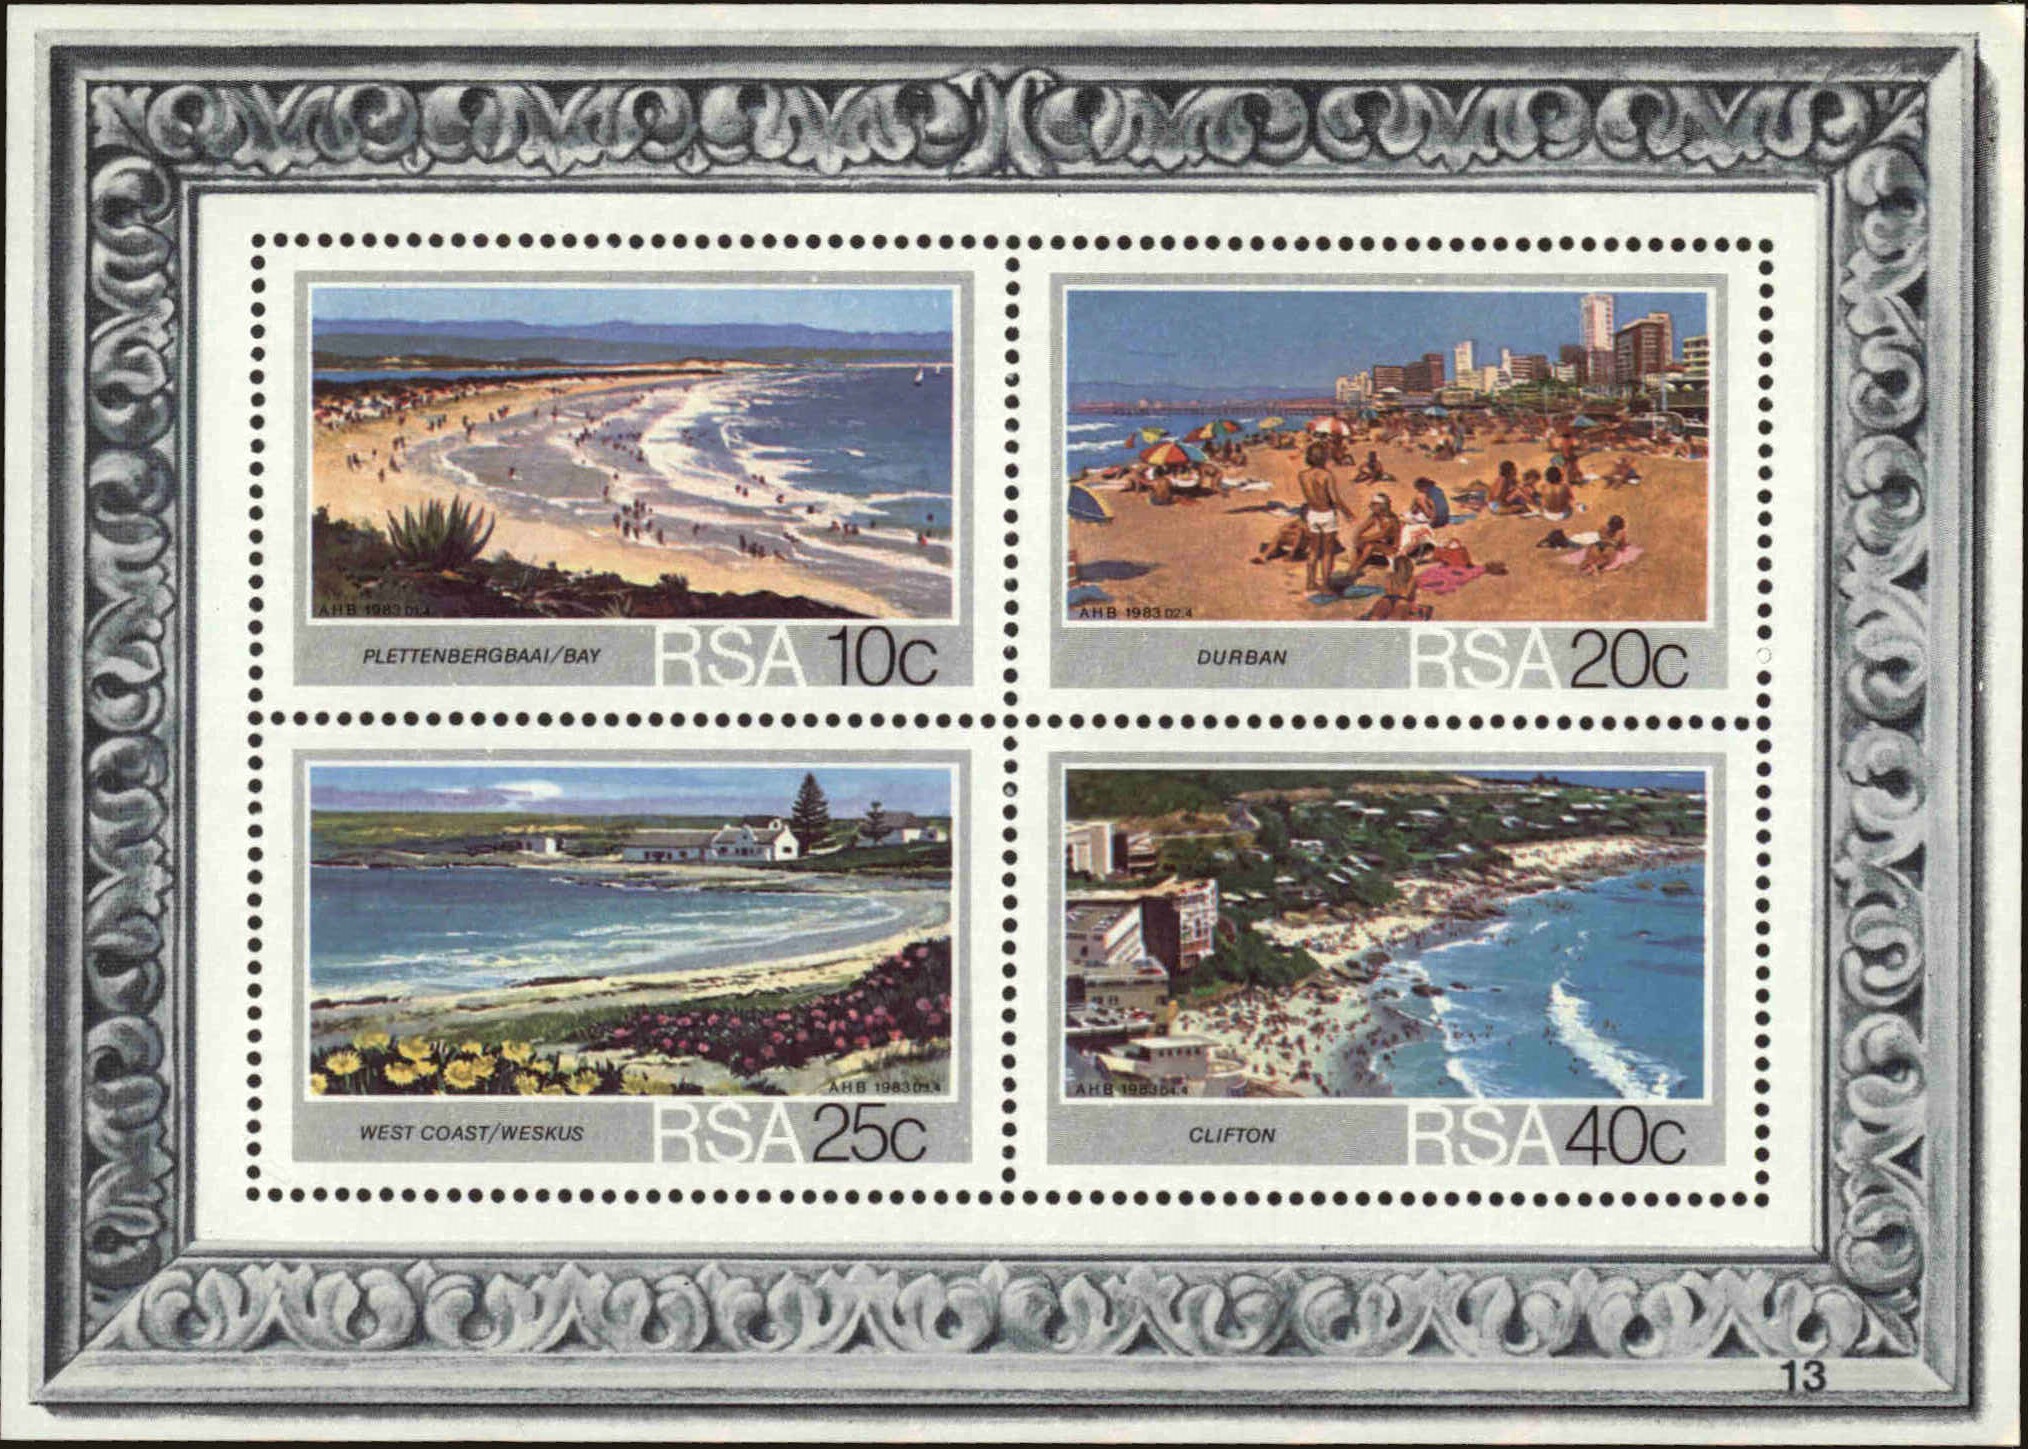 Front view of South Africa 625a collectors stamp